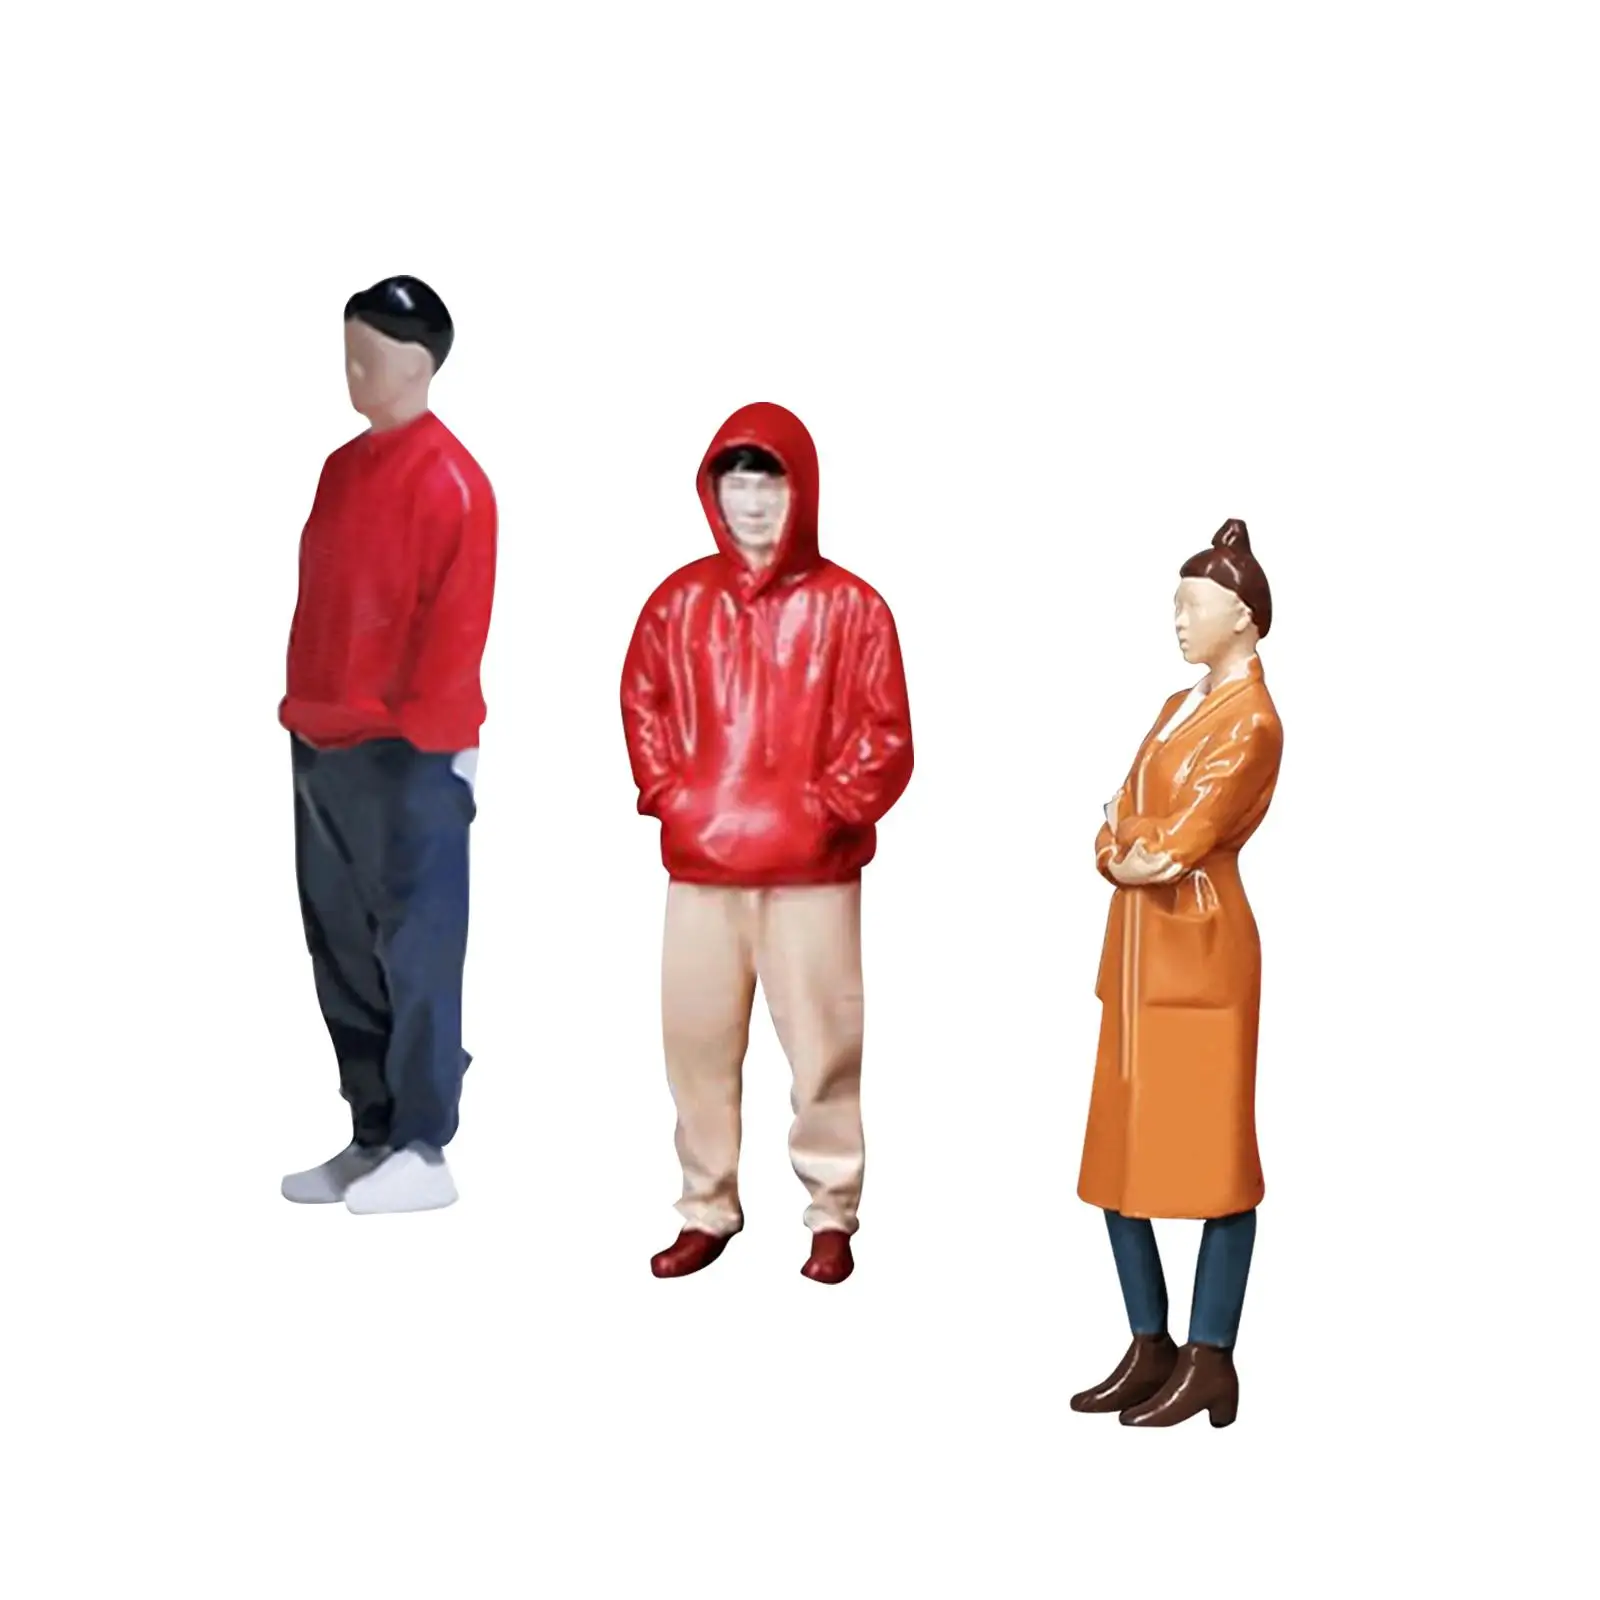 Realistic 1/64 Scale People Figurines for Miniature Scene Layout Decoration